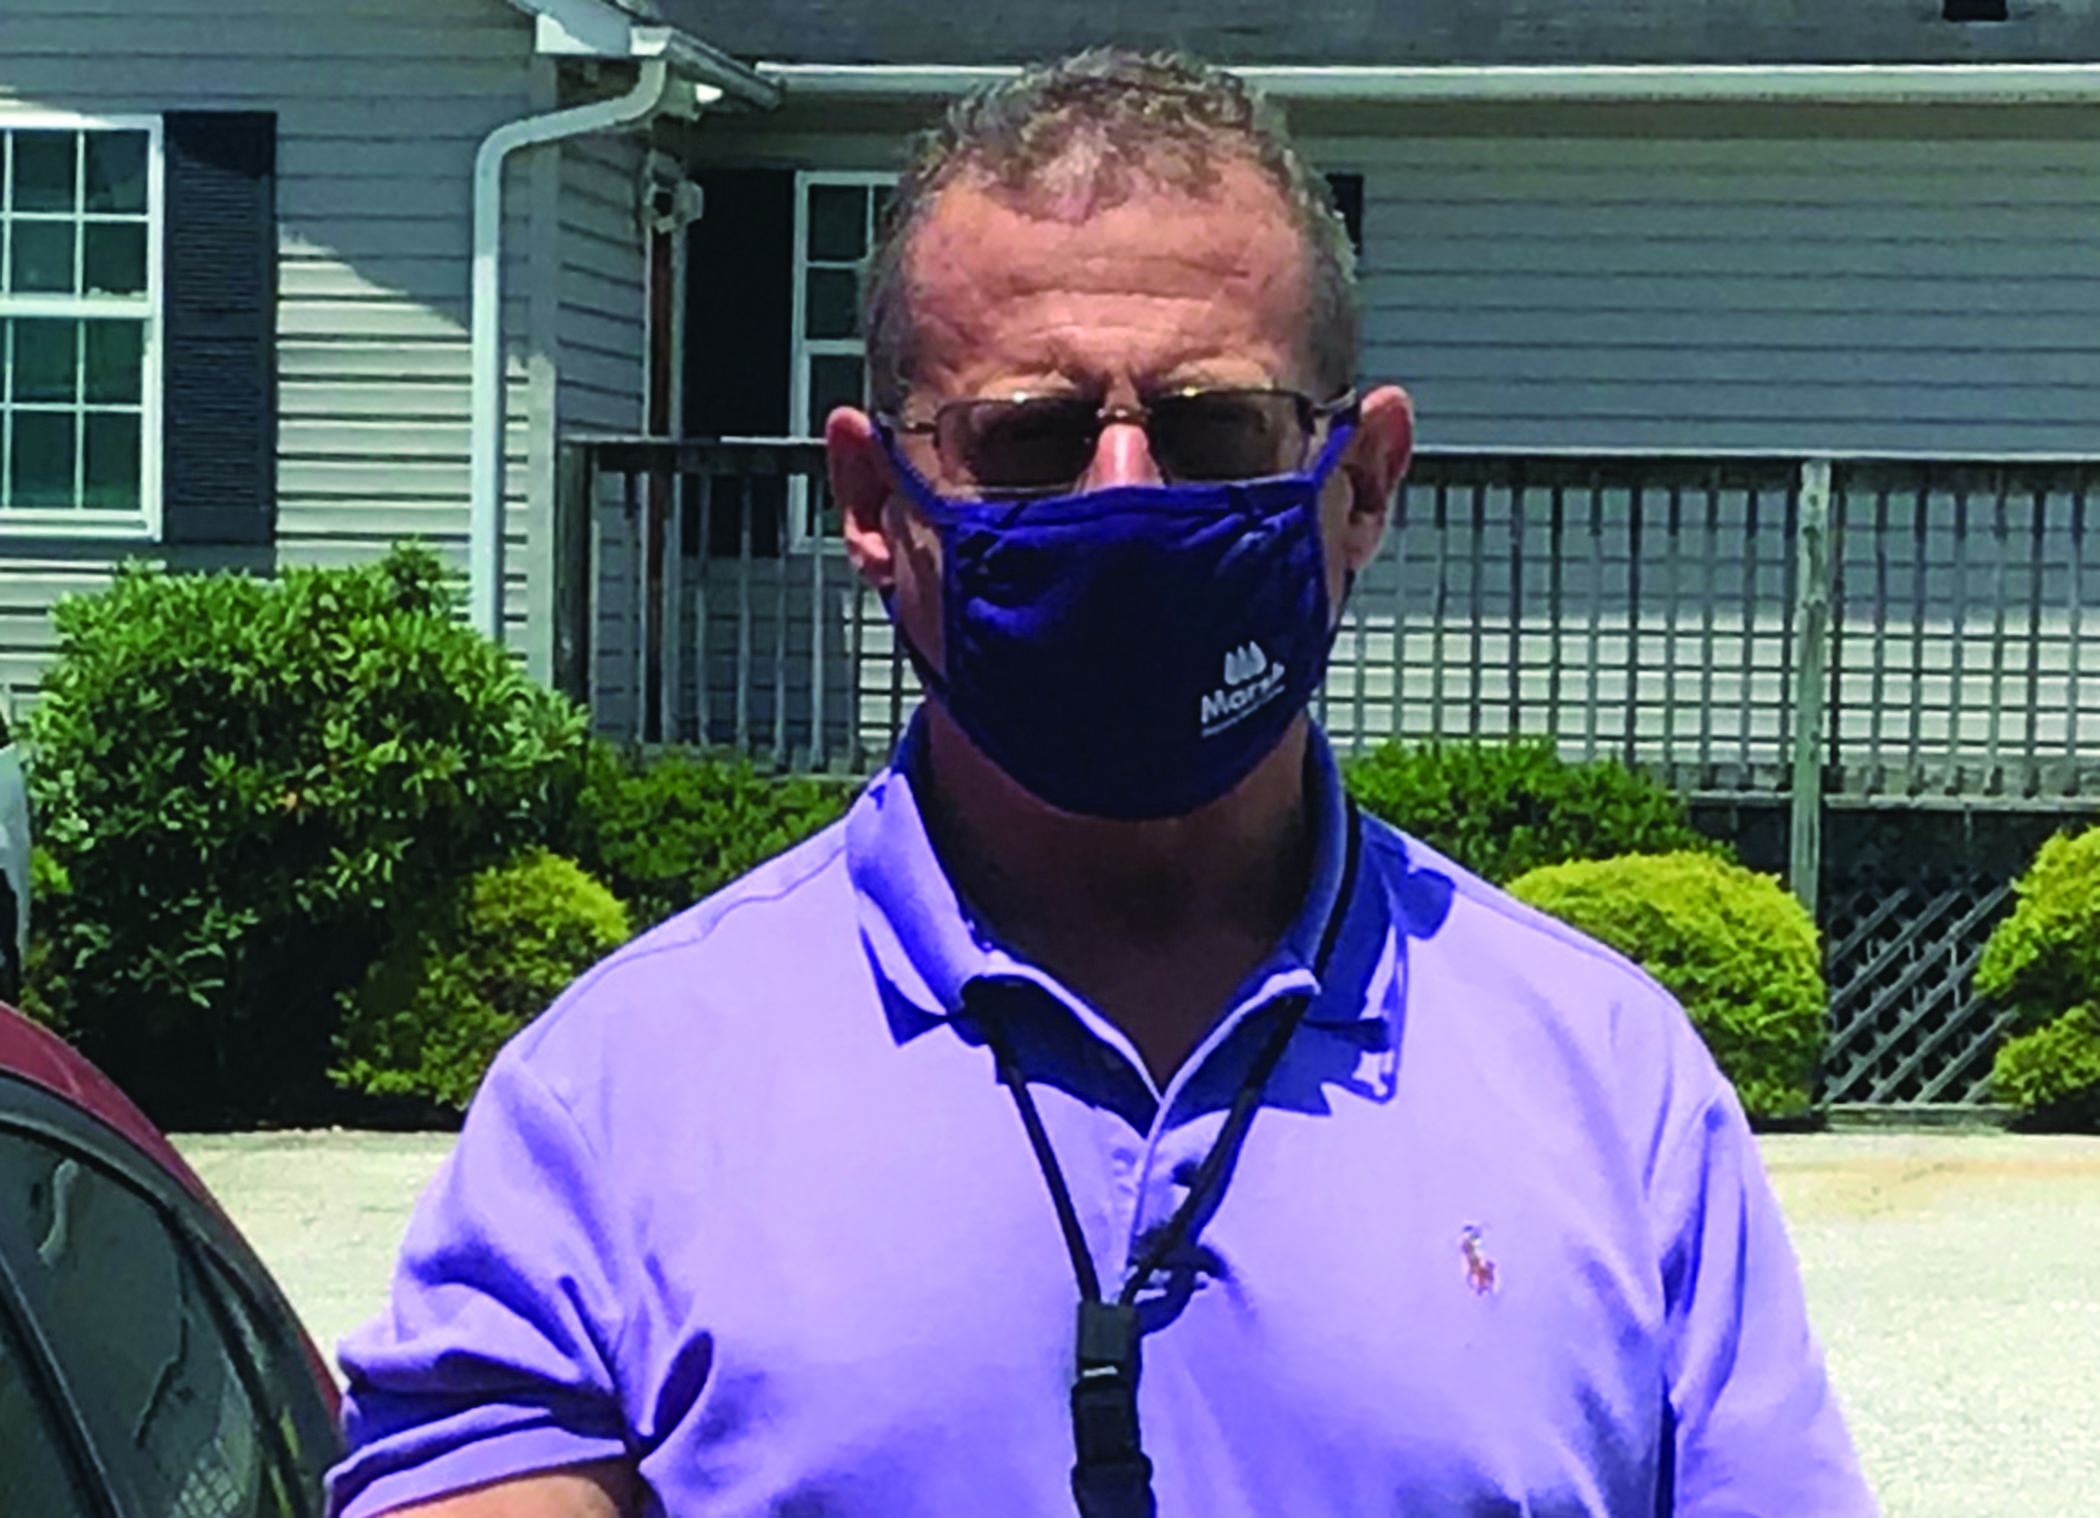 Mitchell County Sheriff Donald Street dons his mask as he prepares to head out on patrol. Street said masks are not a political issue and said he plans to wear one if it helps protect others. He encourages the public to do the same. (Submitted photo)